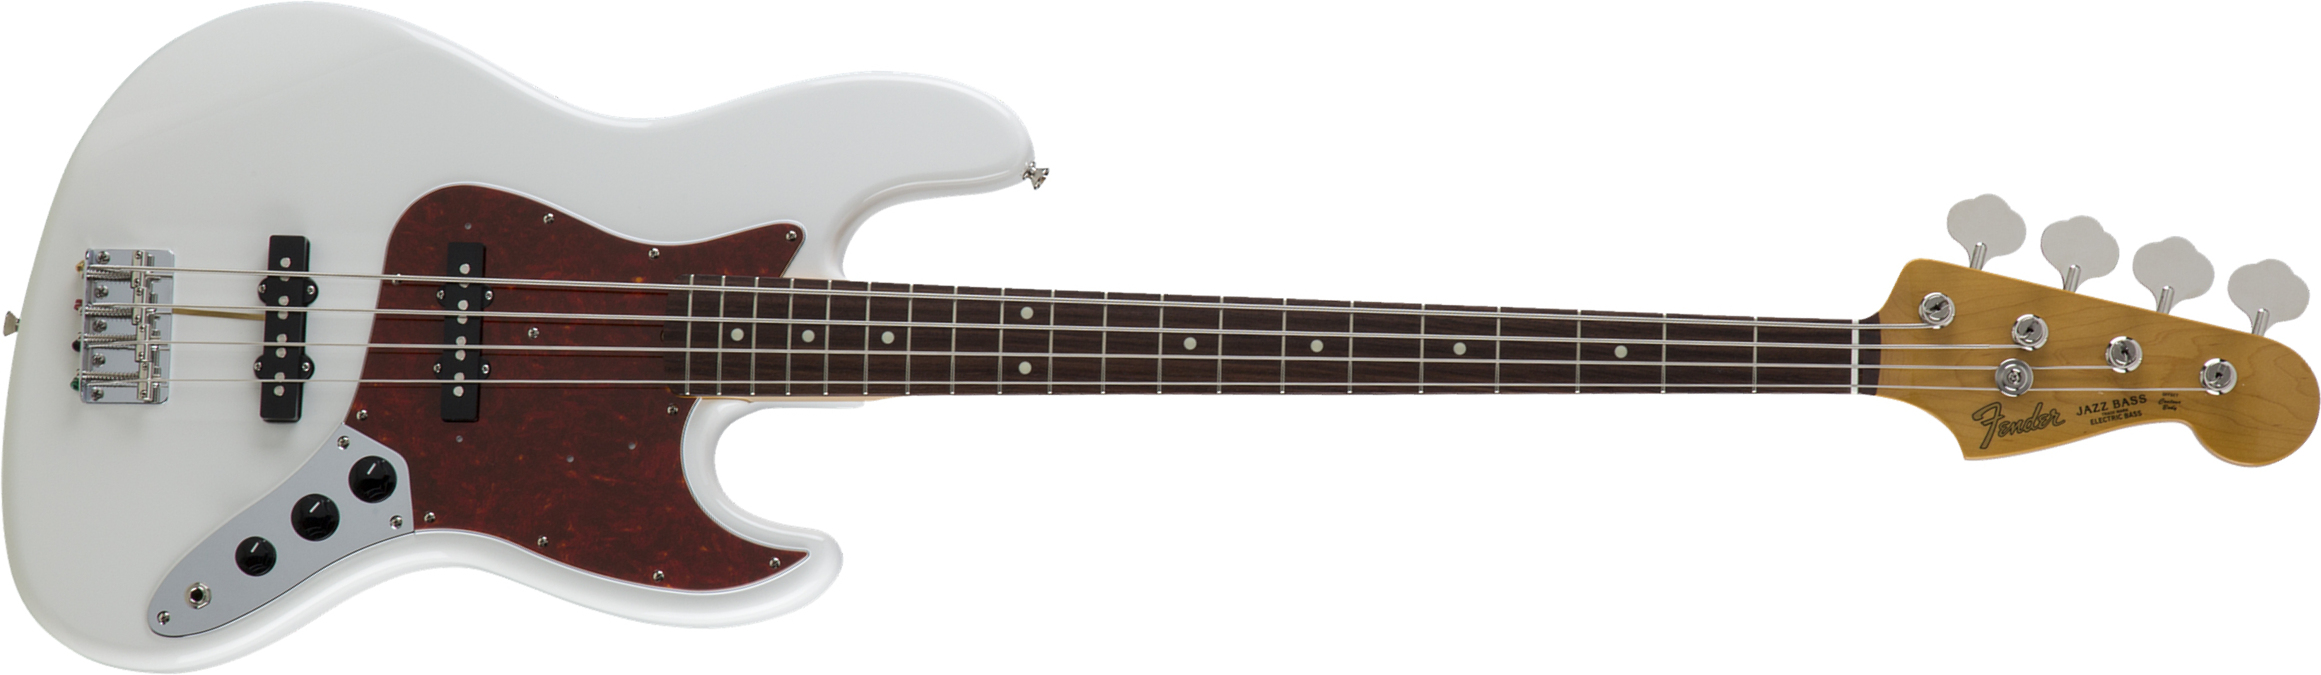 Fender Jazz Bass Traditional Ii 60s Jap 2s Trem Rw - Olympic White - Solid body electric bass - Main picture